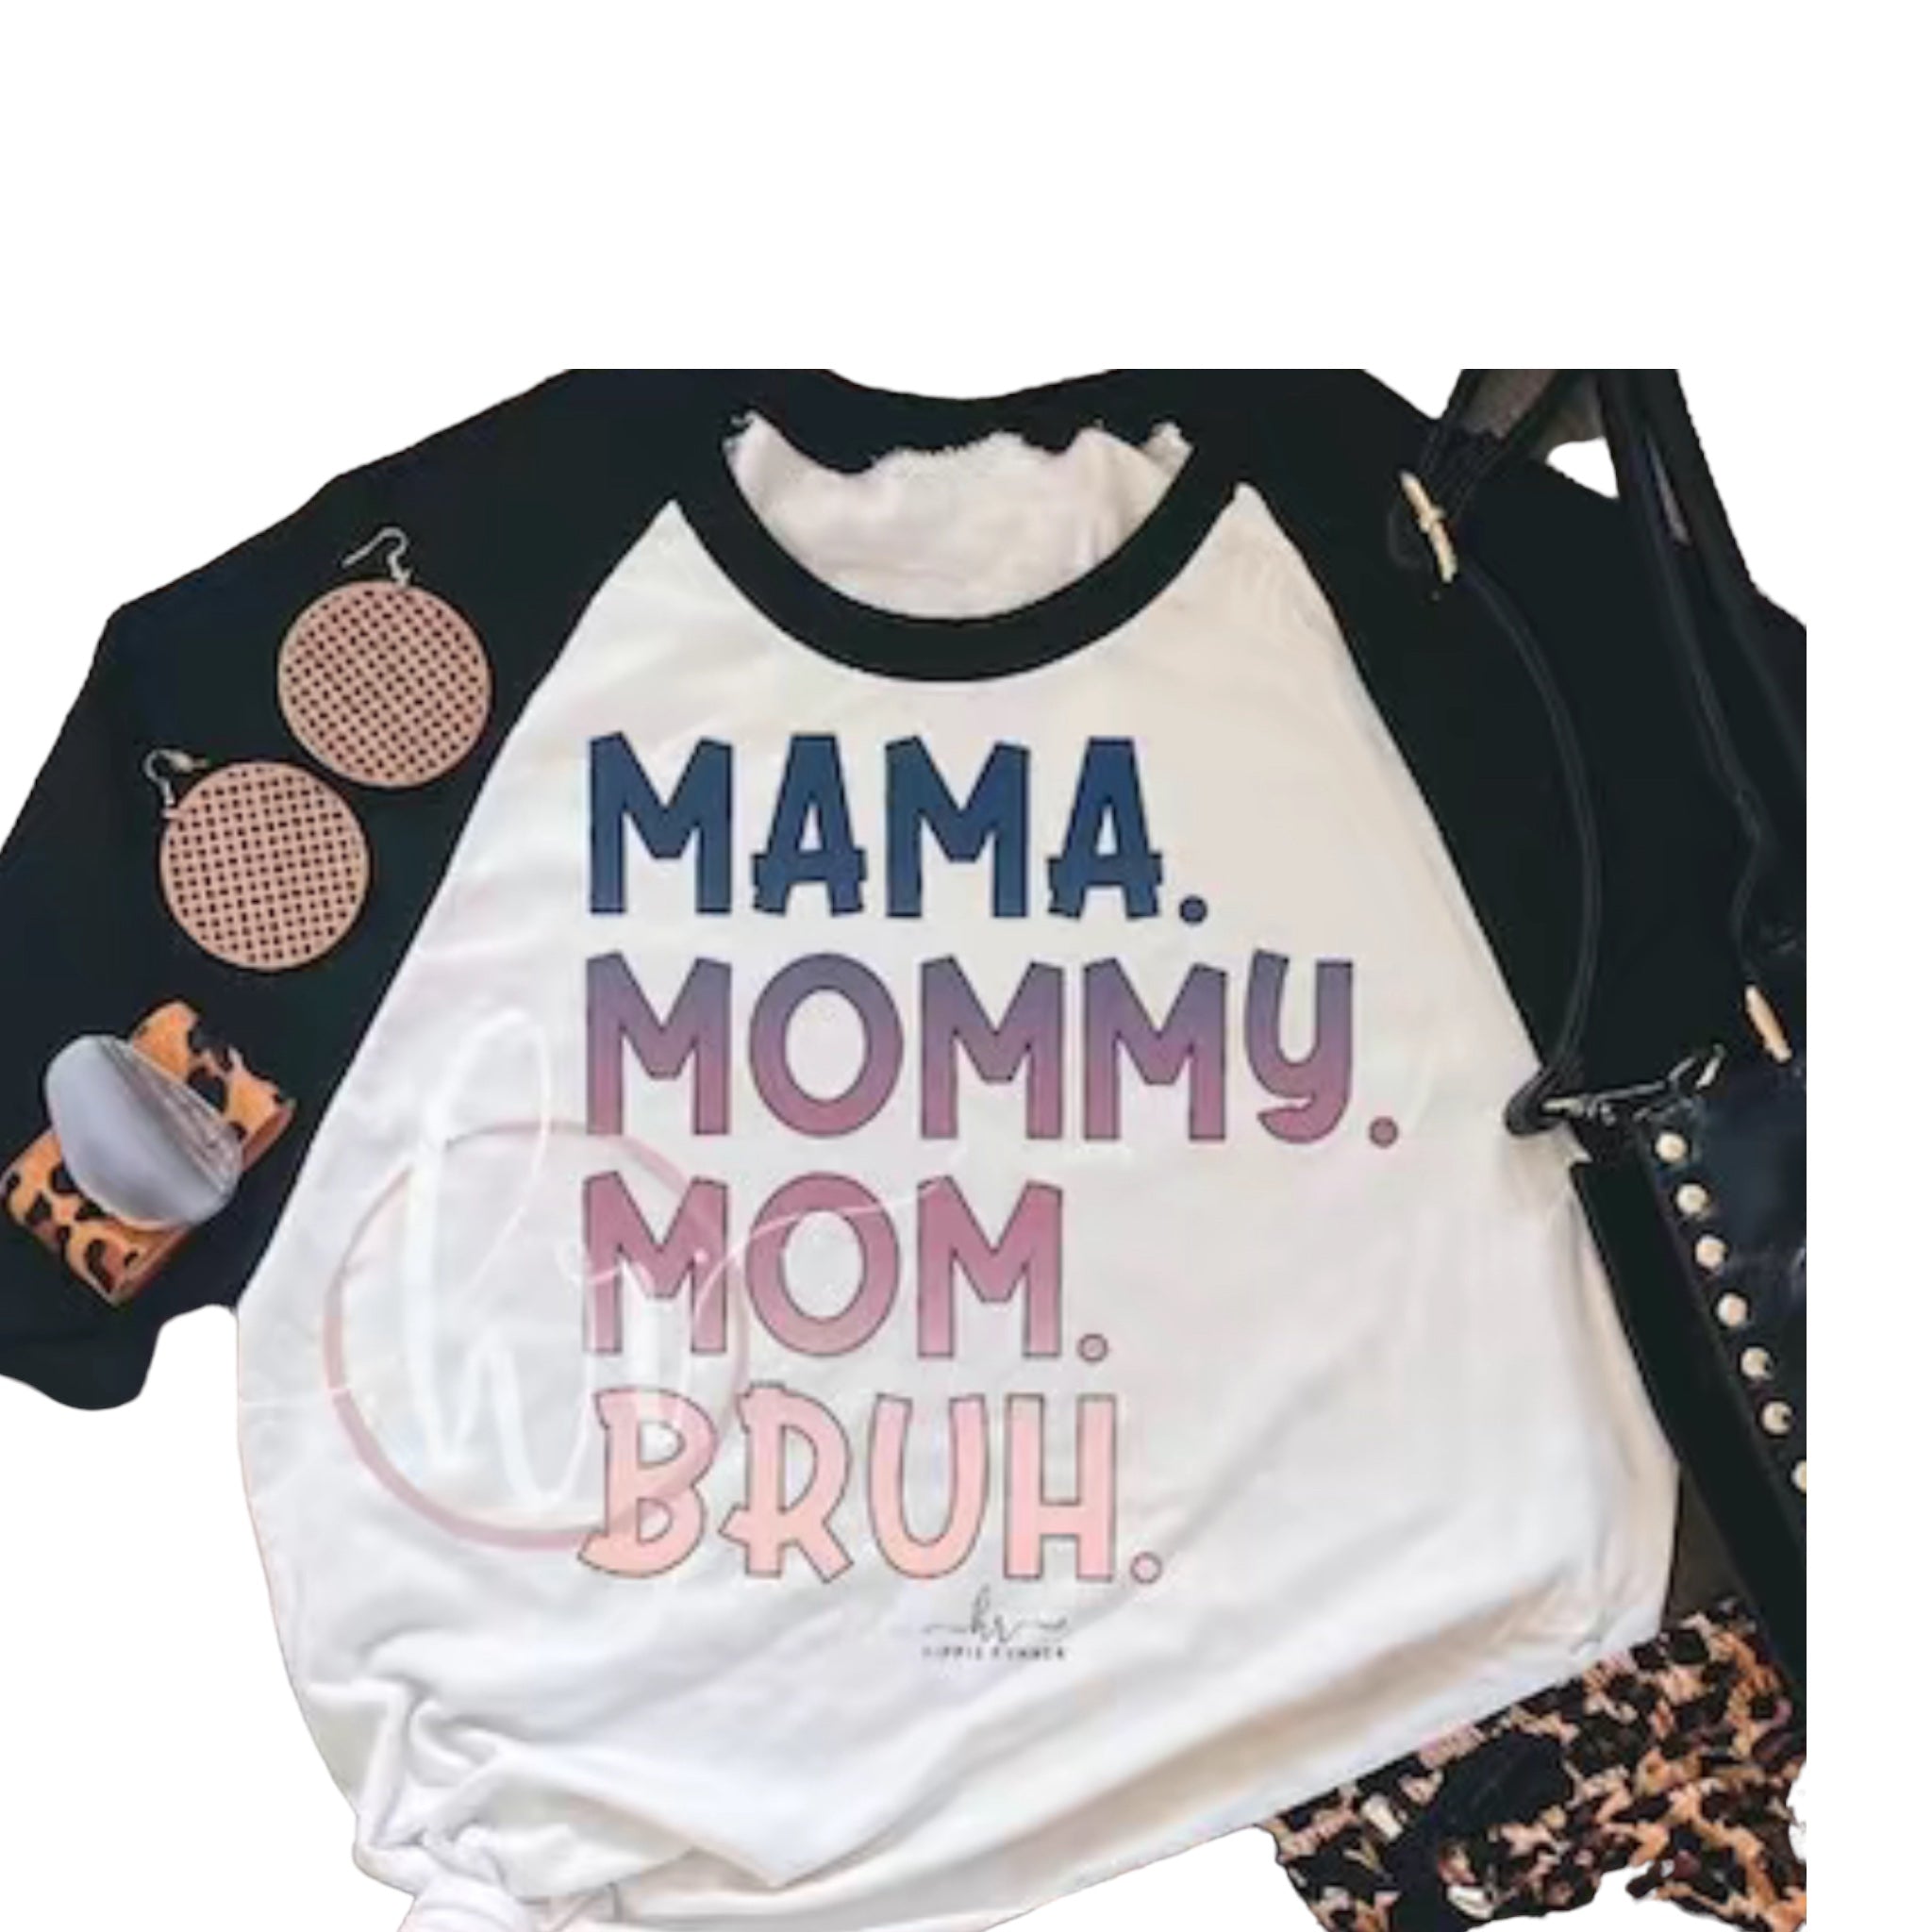 Women's Plus Size Baseball Mom or Bruh T-Shirt - Fabulously Dressed Boutique 